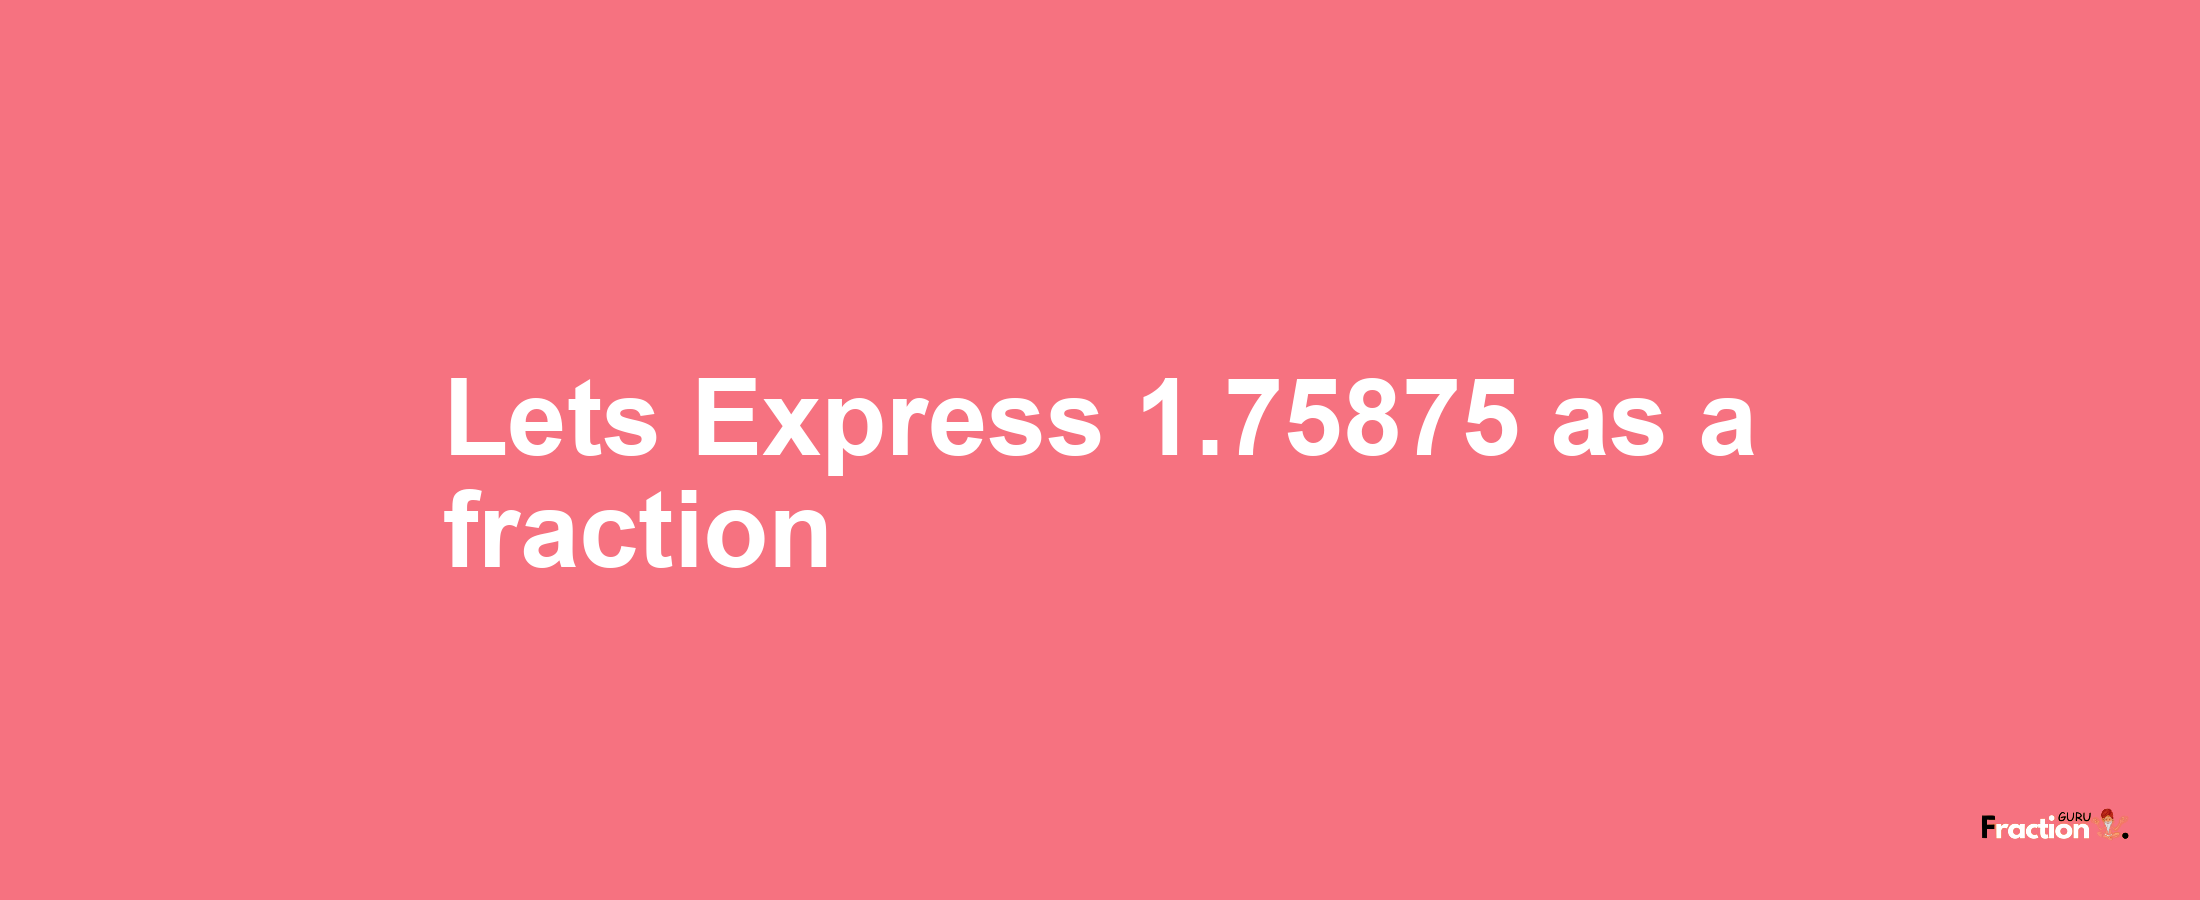 Lets Express 1.75875 as afraction